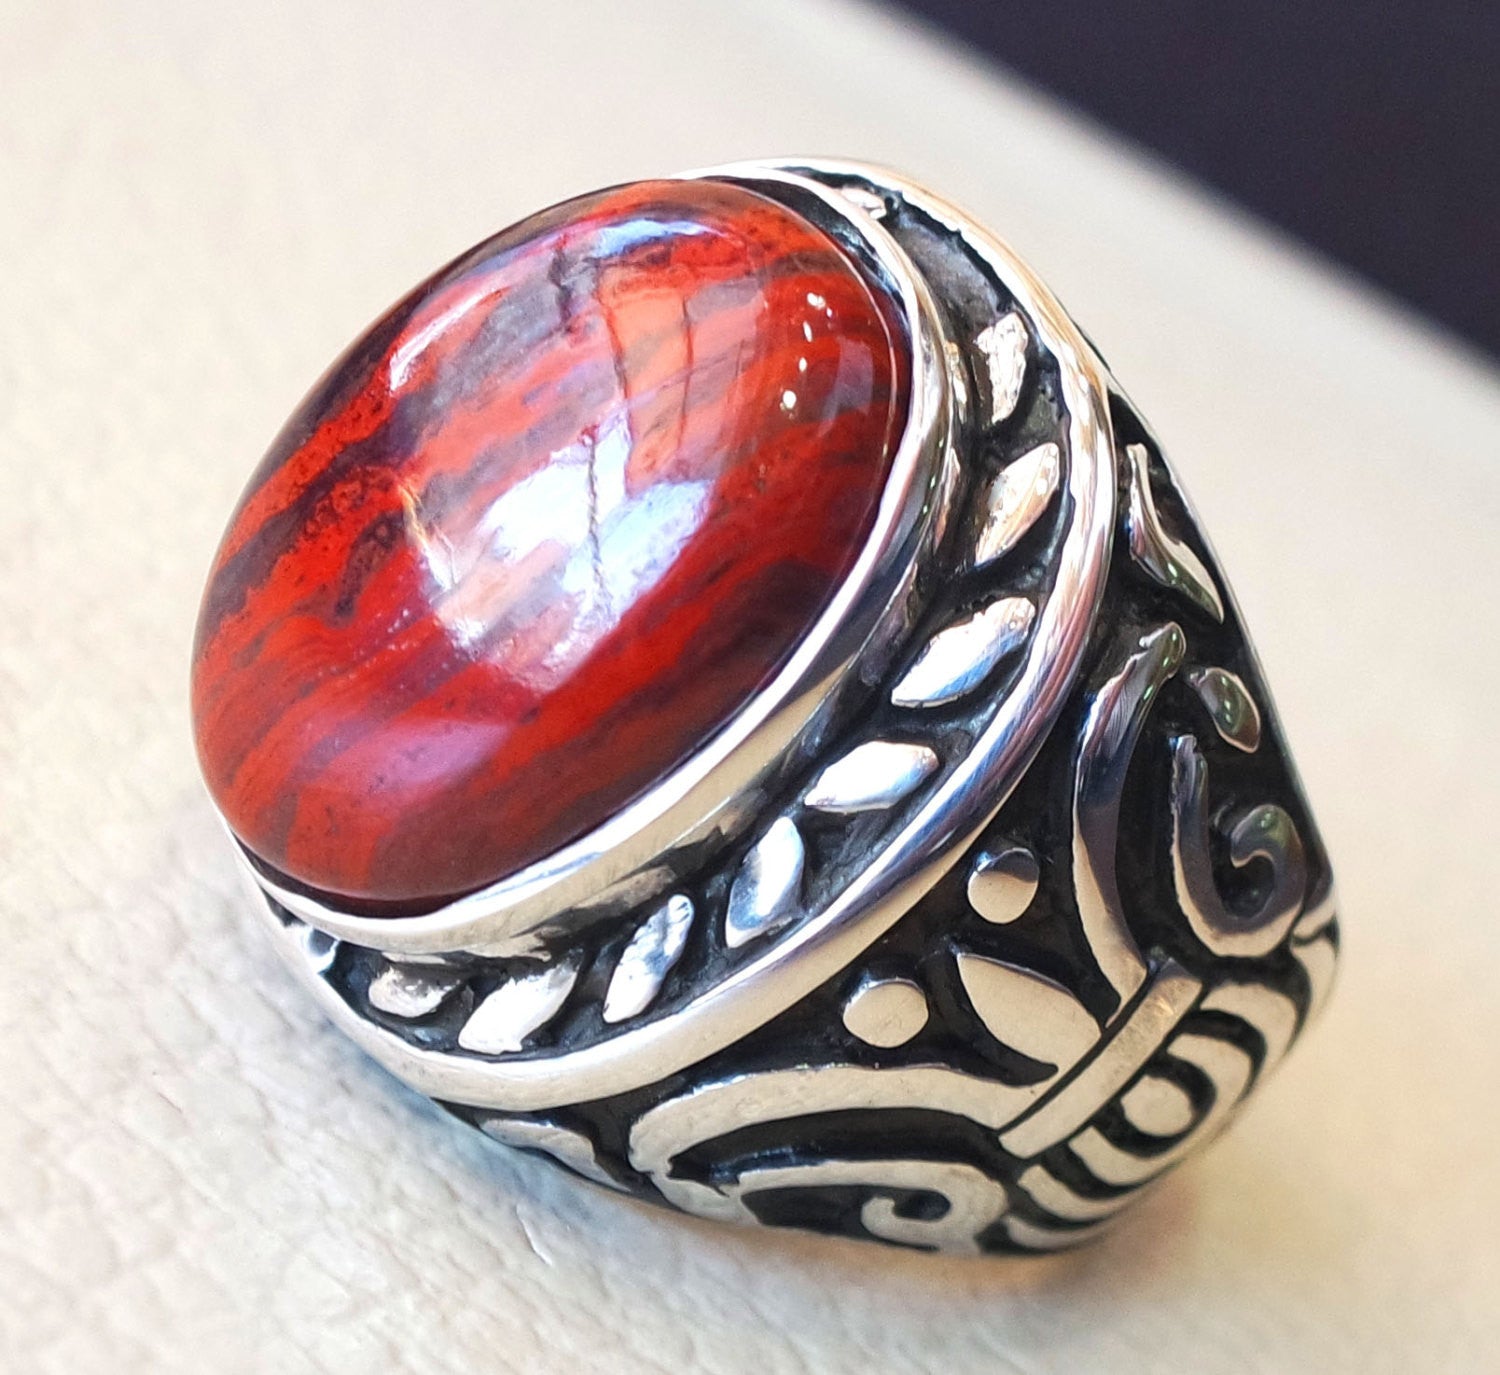 snake skin jasper stone natural gem sterling silver 925 ring red and black oval semi precious cabochon man huge ring jewelry fast shipping